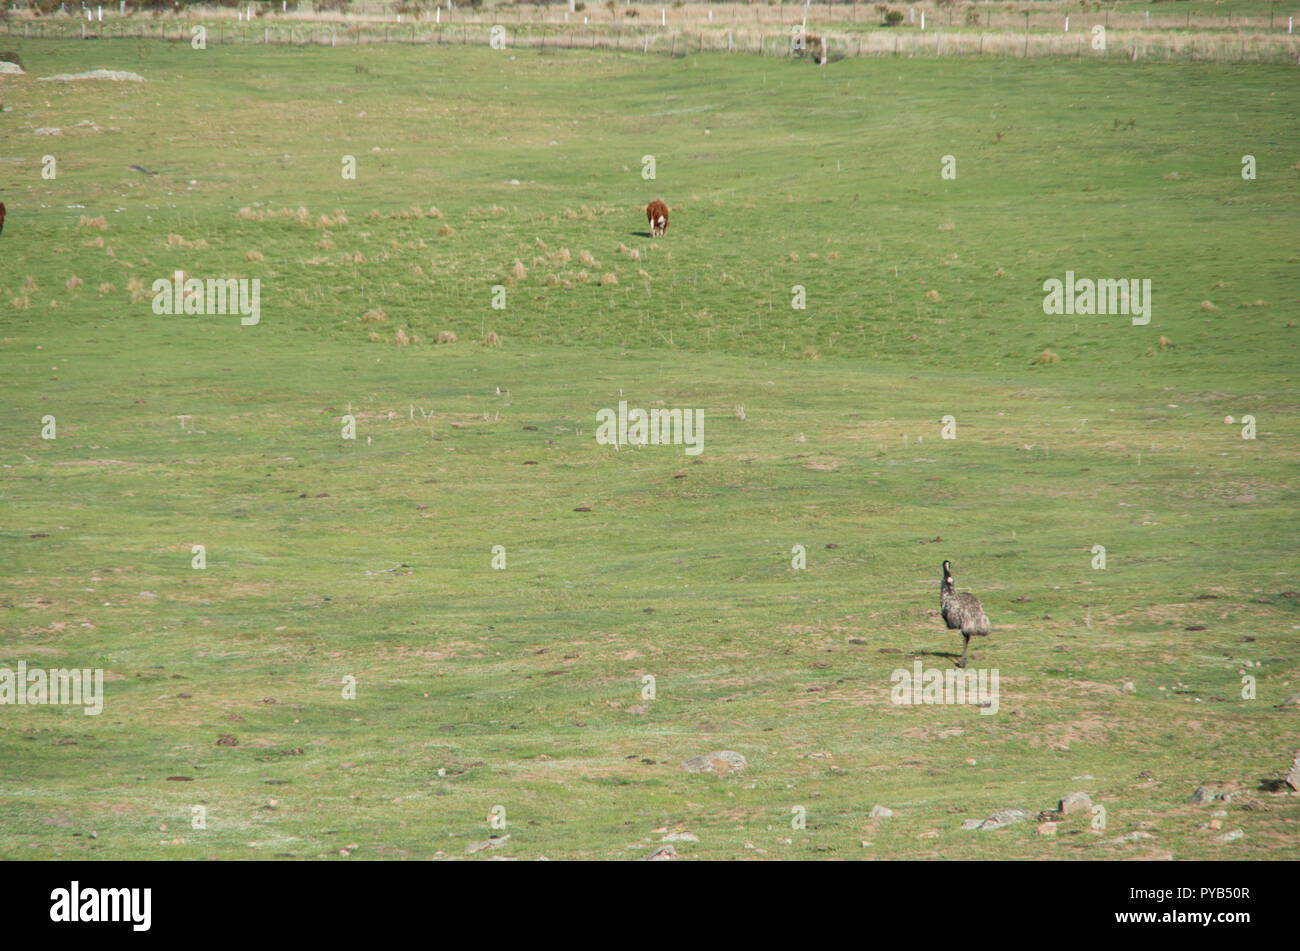 Emu walking in the snowy mountains area Stock Photo